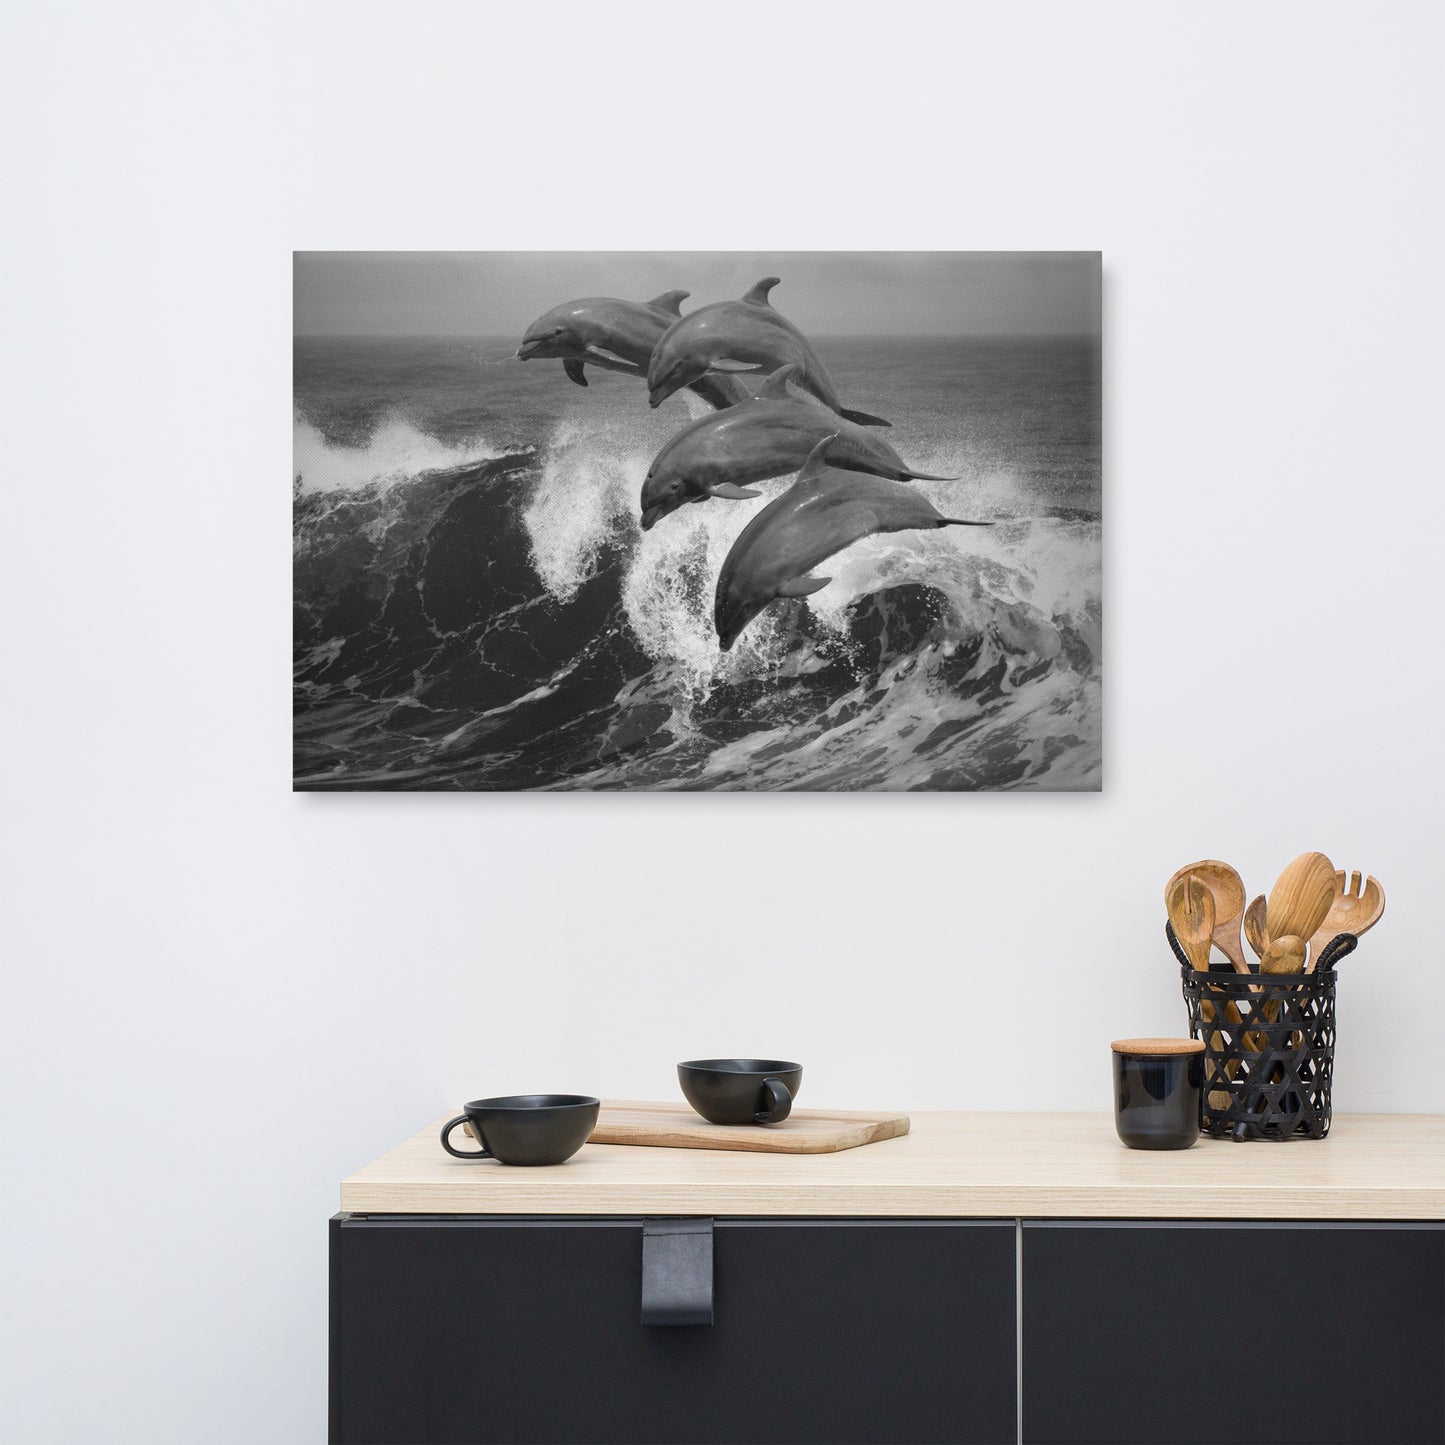 Four Bottle Noise Dolphins Jumping Waves In Tropical Ocean Black and White Animal Wildlife Photograph Canvas Wall Art Print